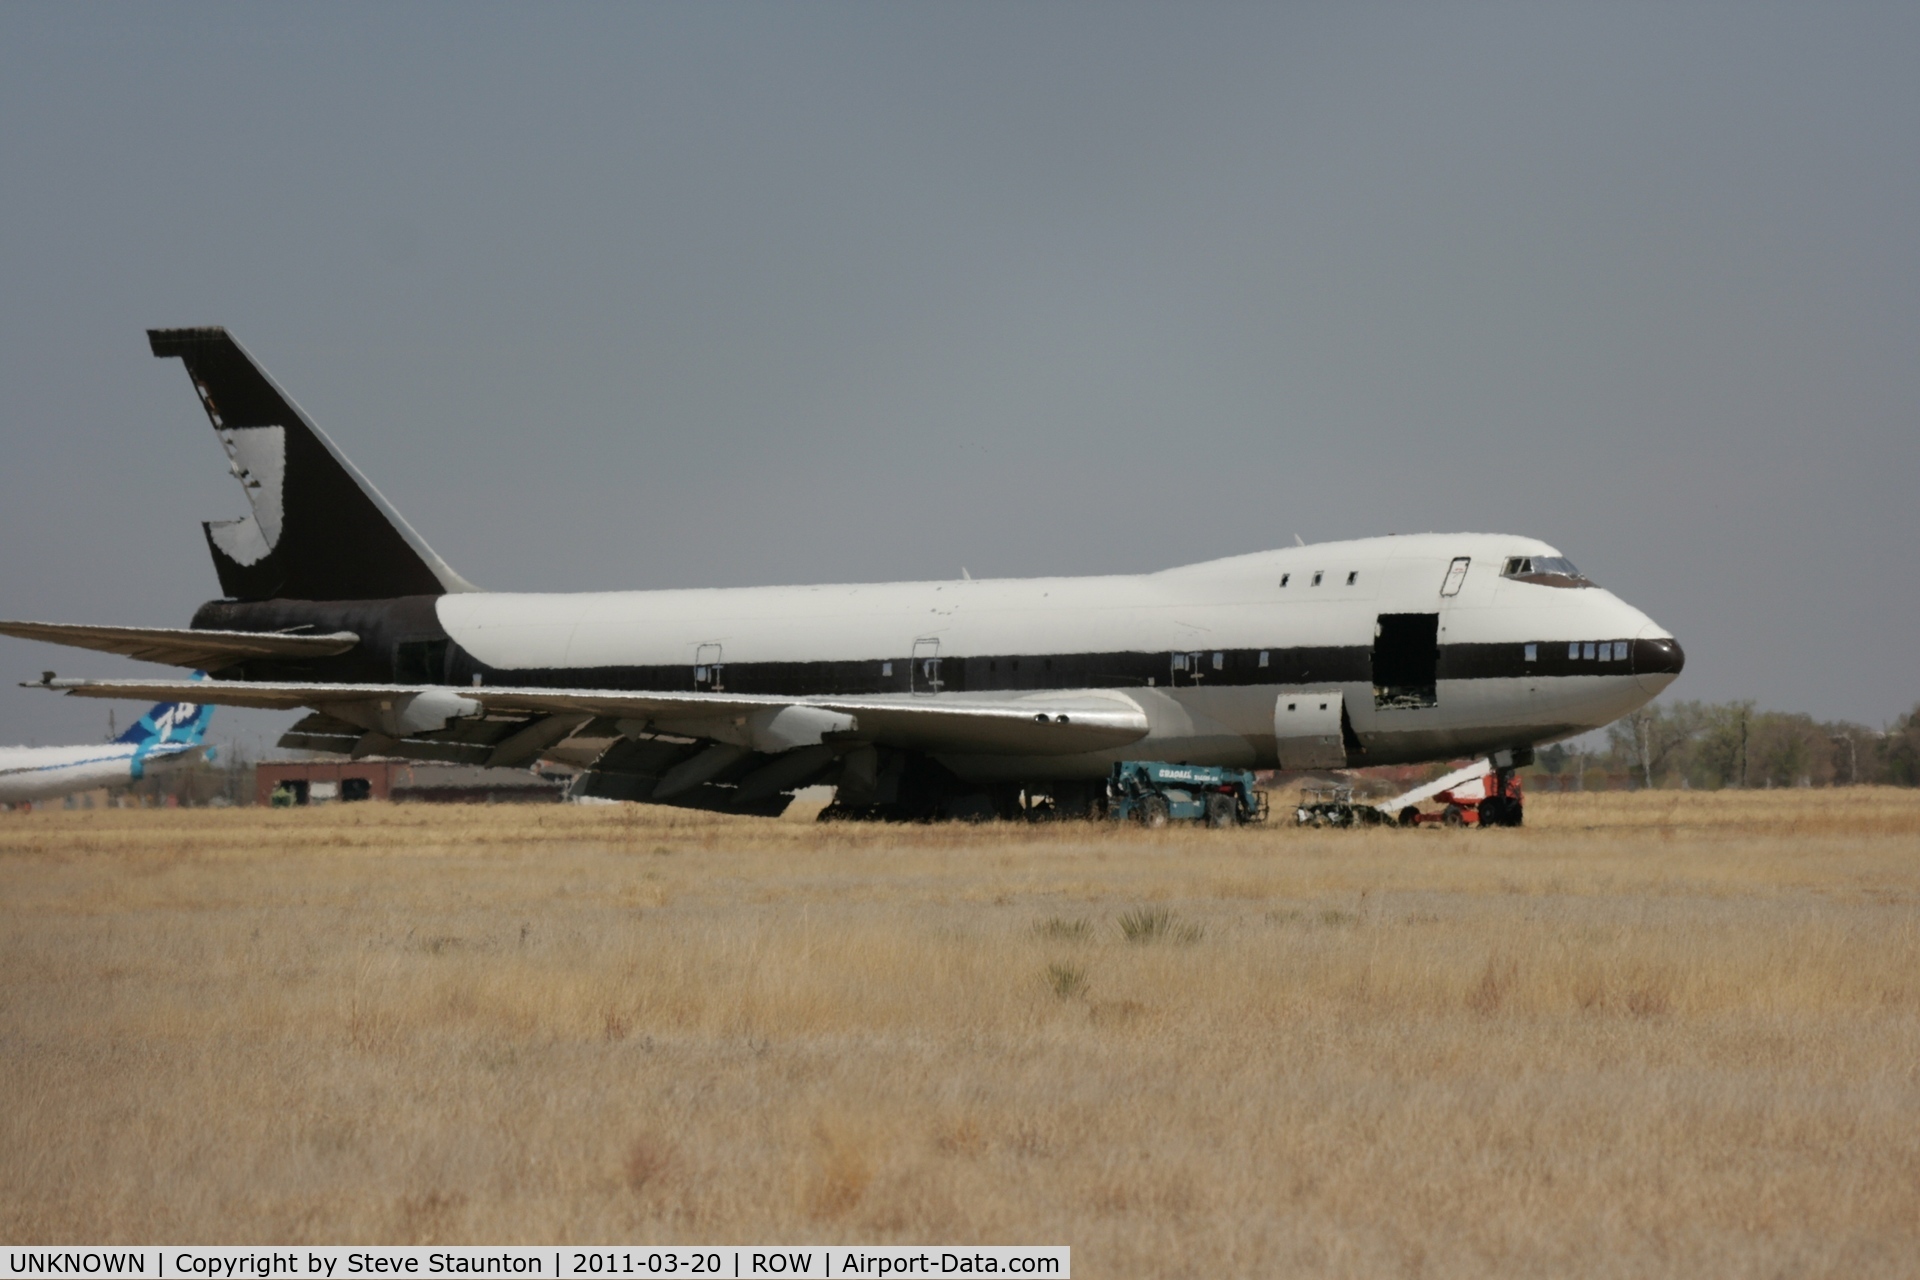 UNKNOWN, Boeing 747 C/N Unknown, Taken at Roswell International Air Centre Storage Facility, New Mexico in March 2011 whilst on an Aeroprint Aviation tour, an un-known Boeing 747 hiding in amongst the other aircraft